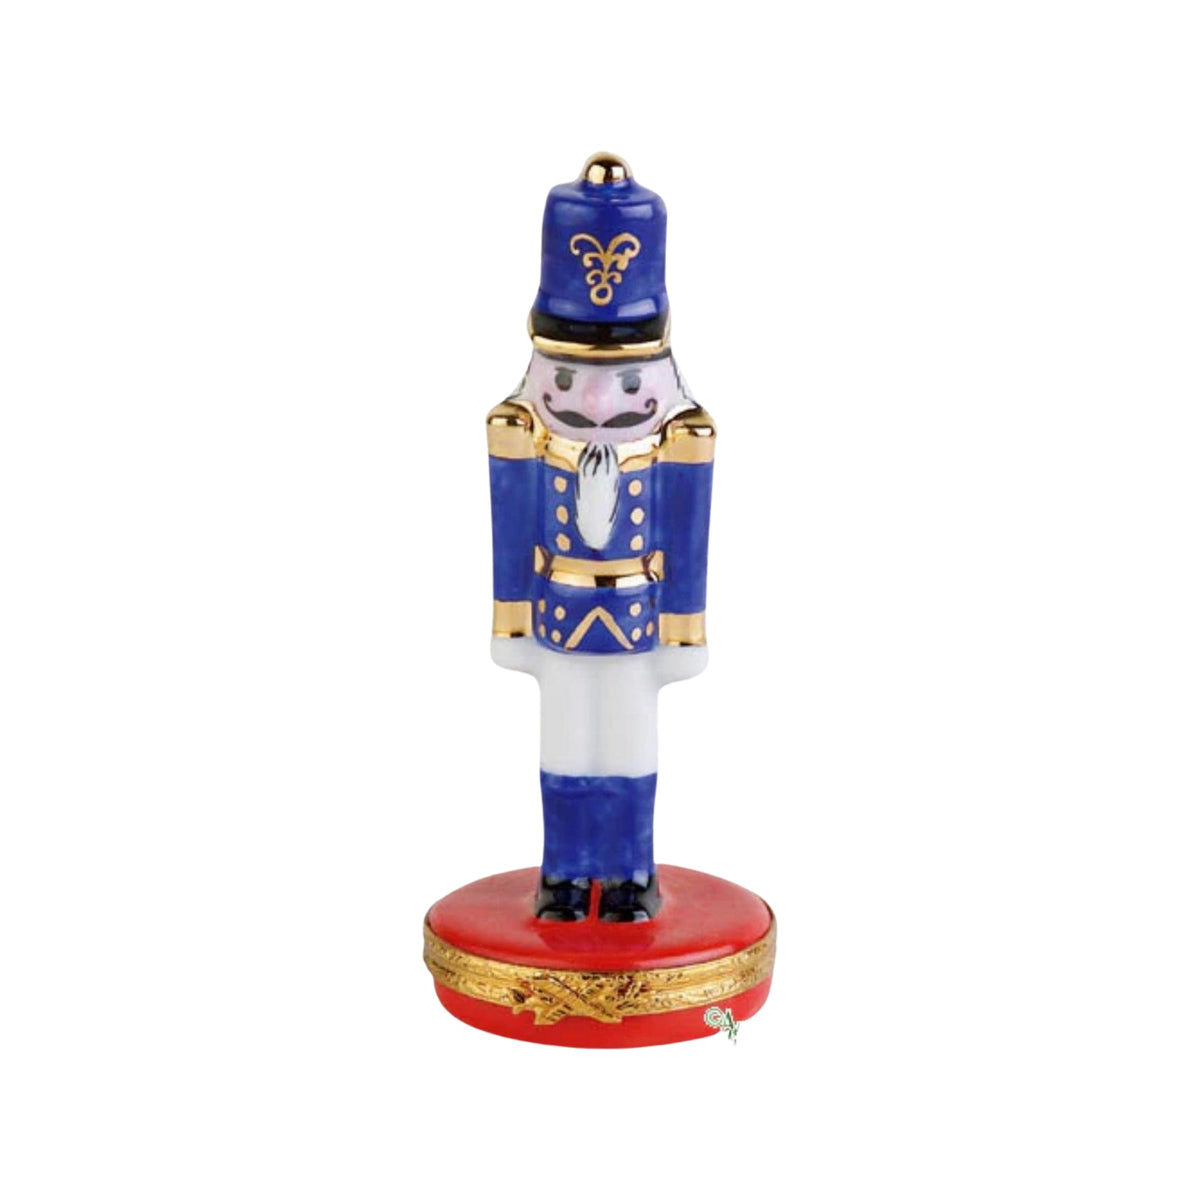 Blue Nutcracker with Gold Trim and Intricate Floral Design